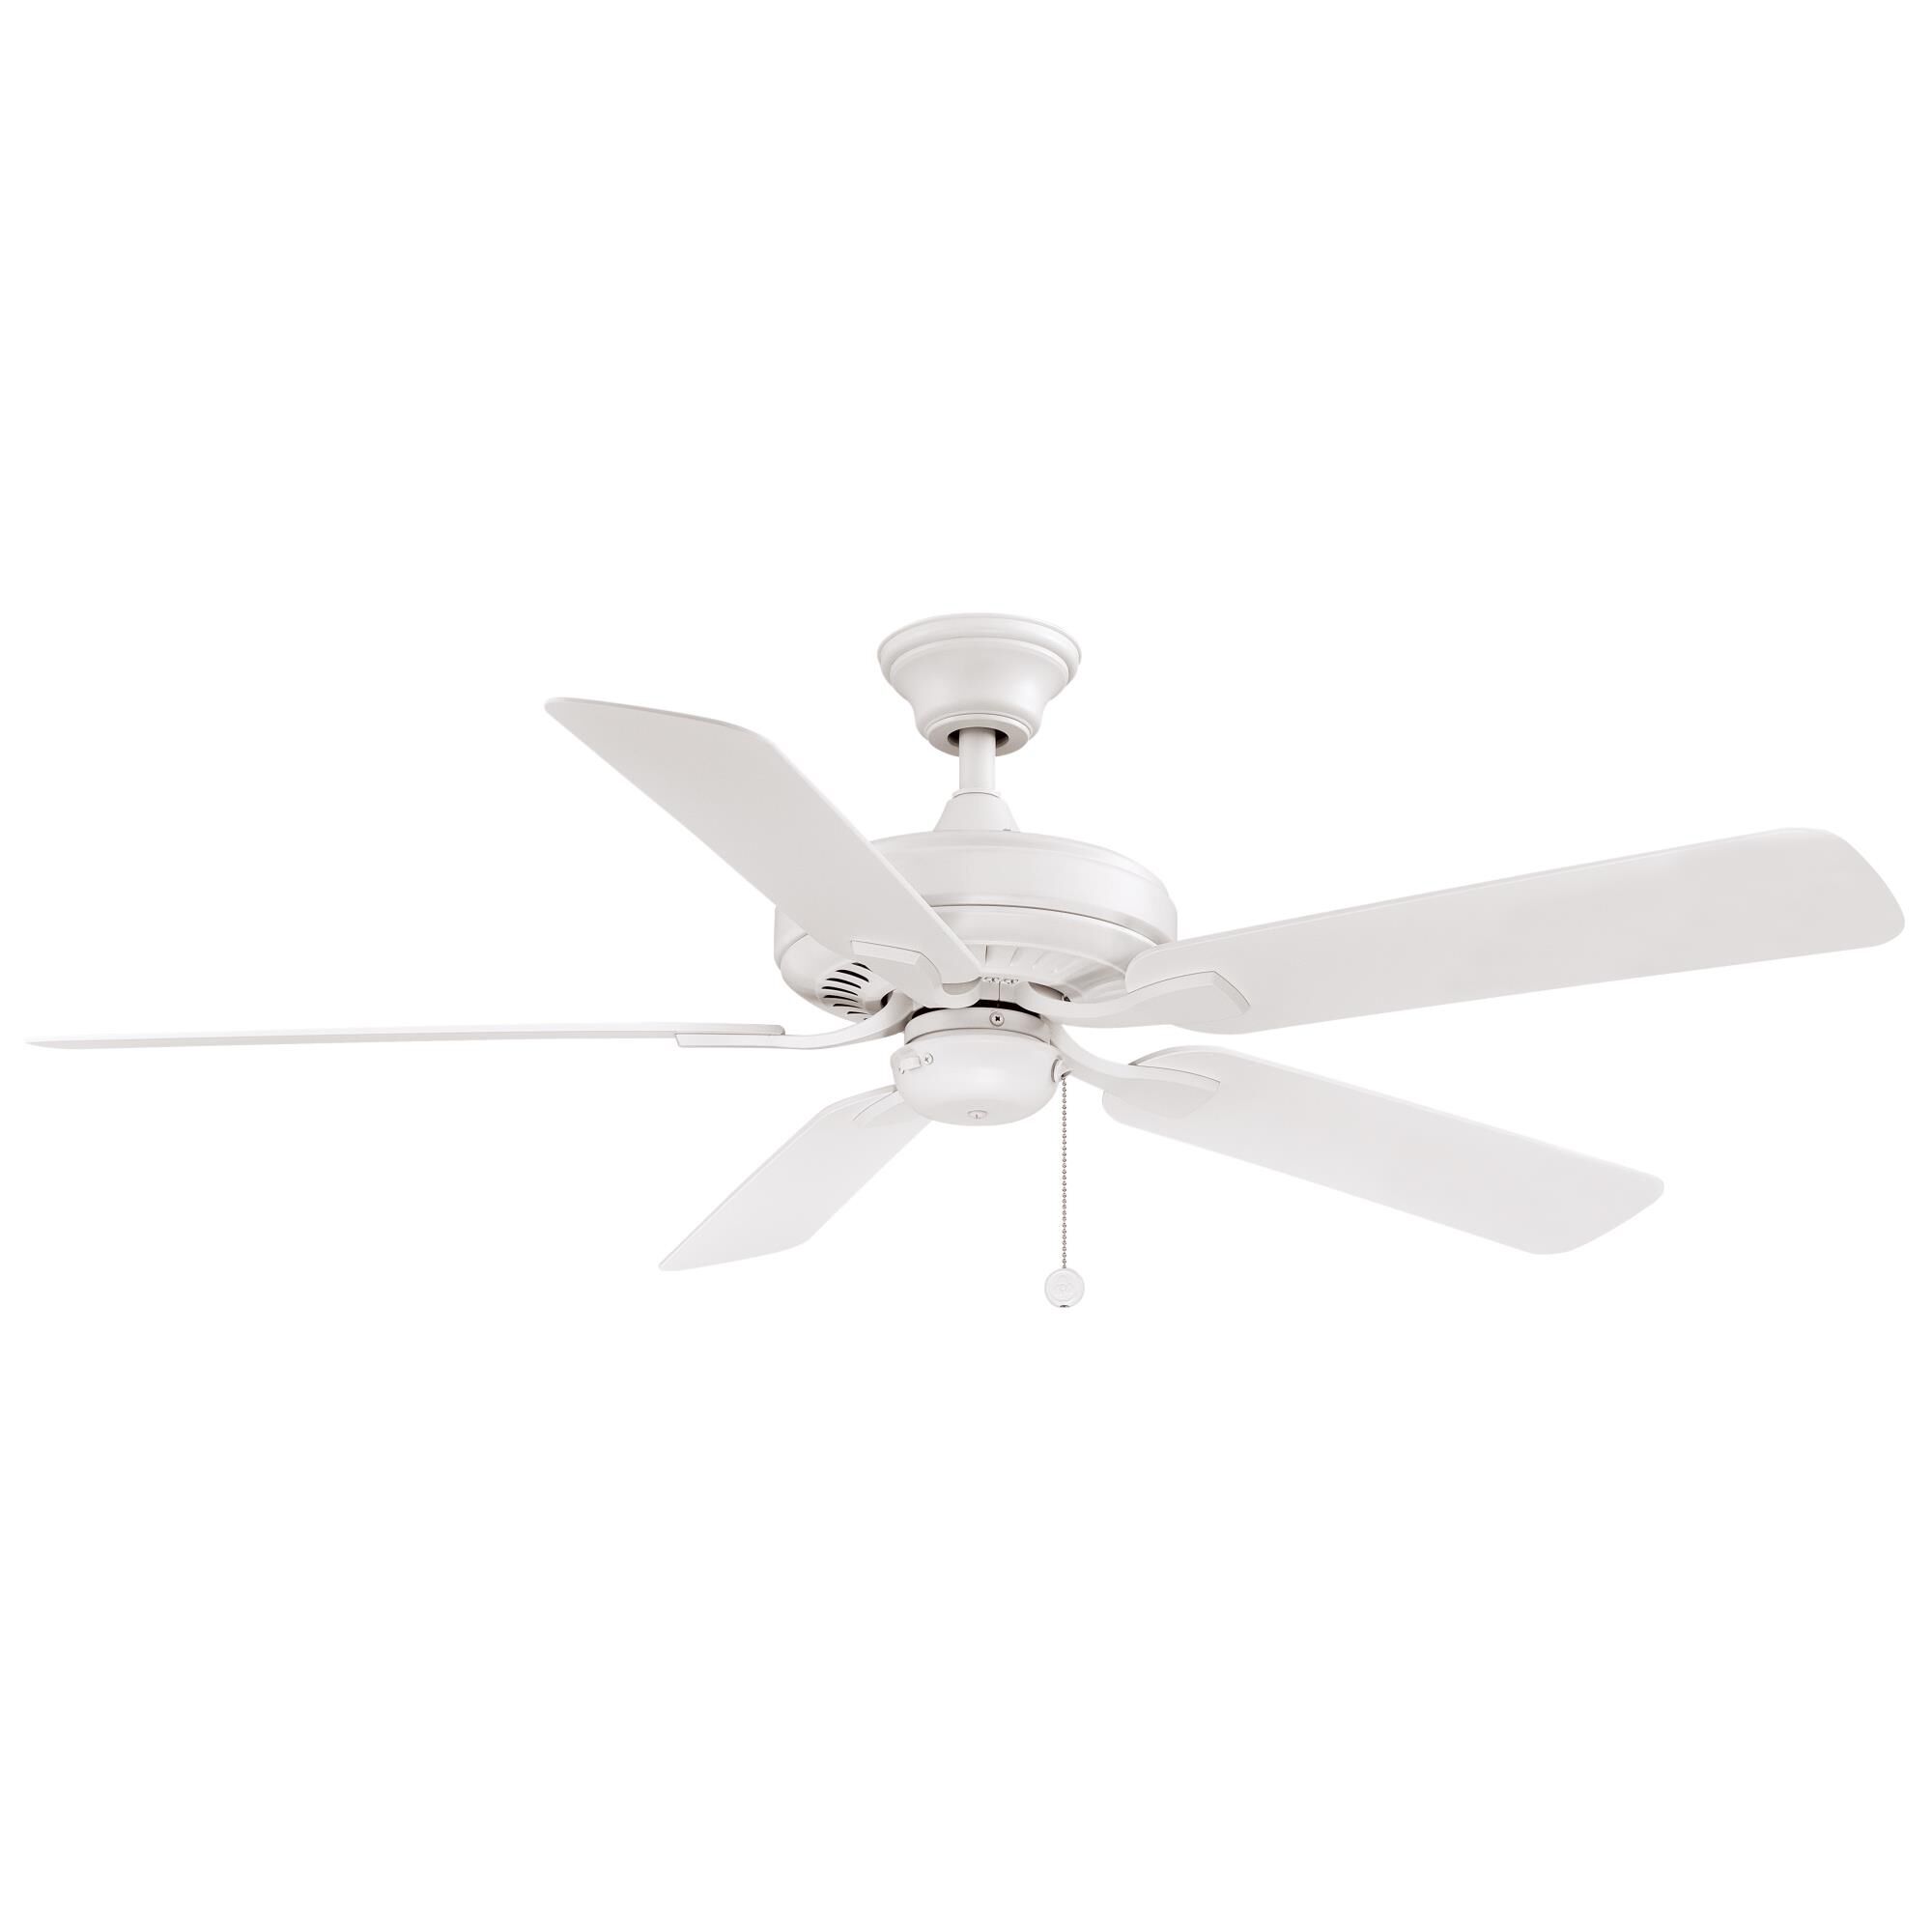 Photos - Fan imation Edgewood Outdoor Rated 52 Inch Ceiling  Edgewood - FP9052MWW